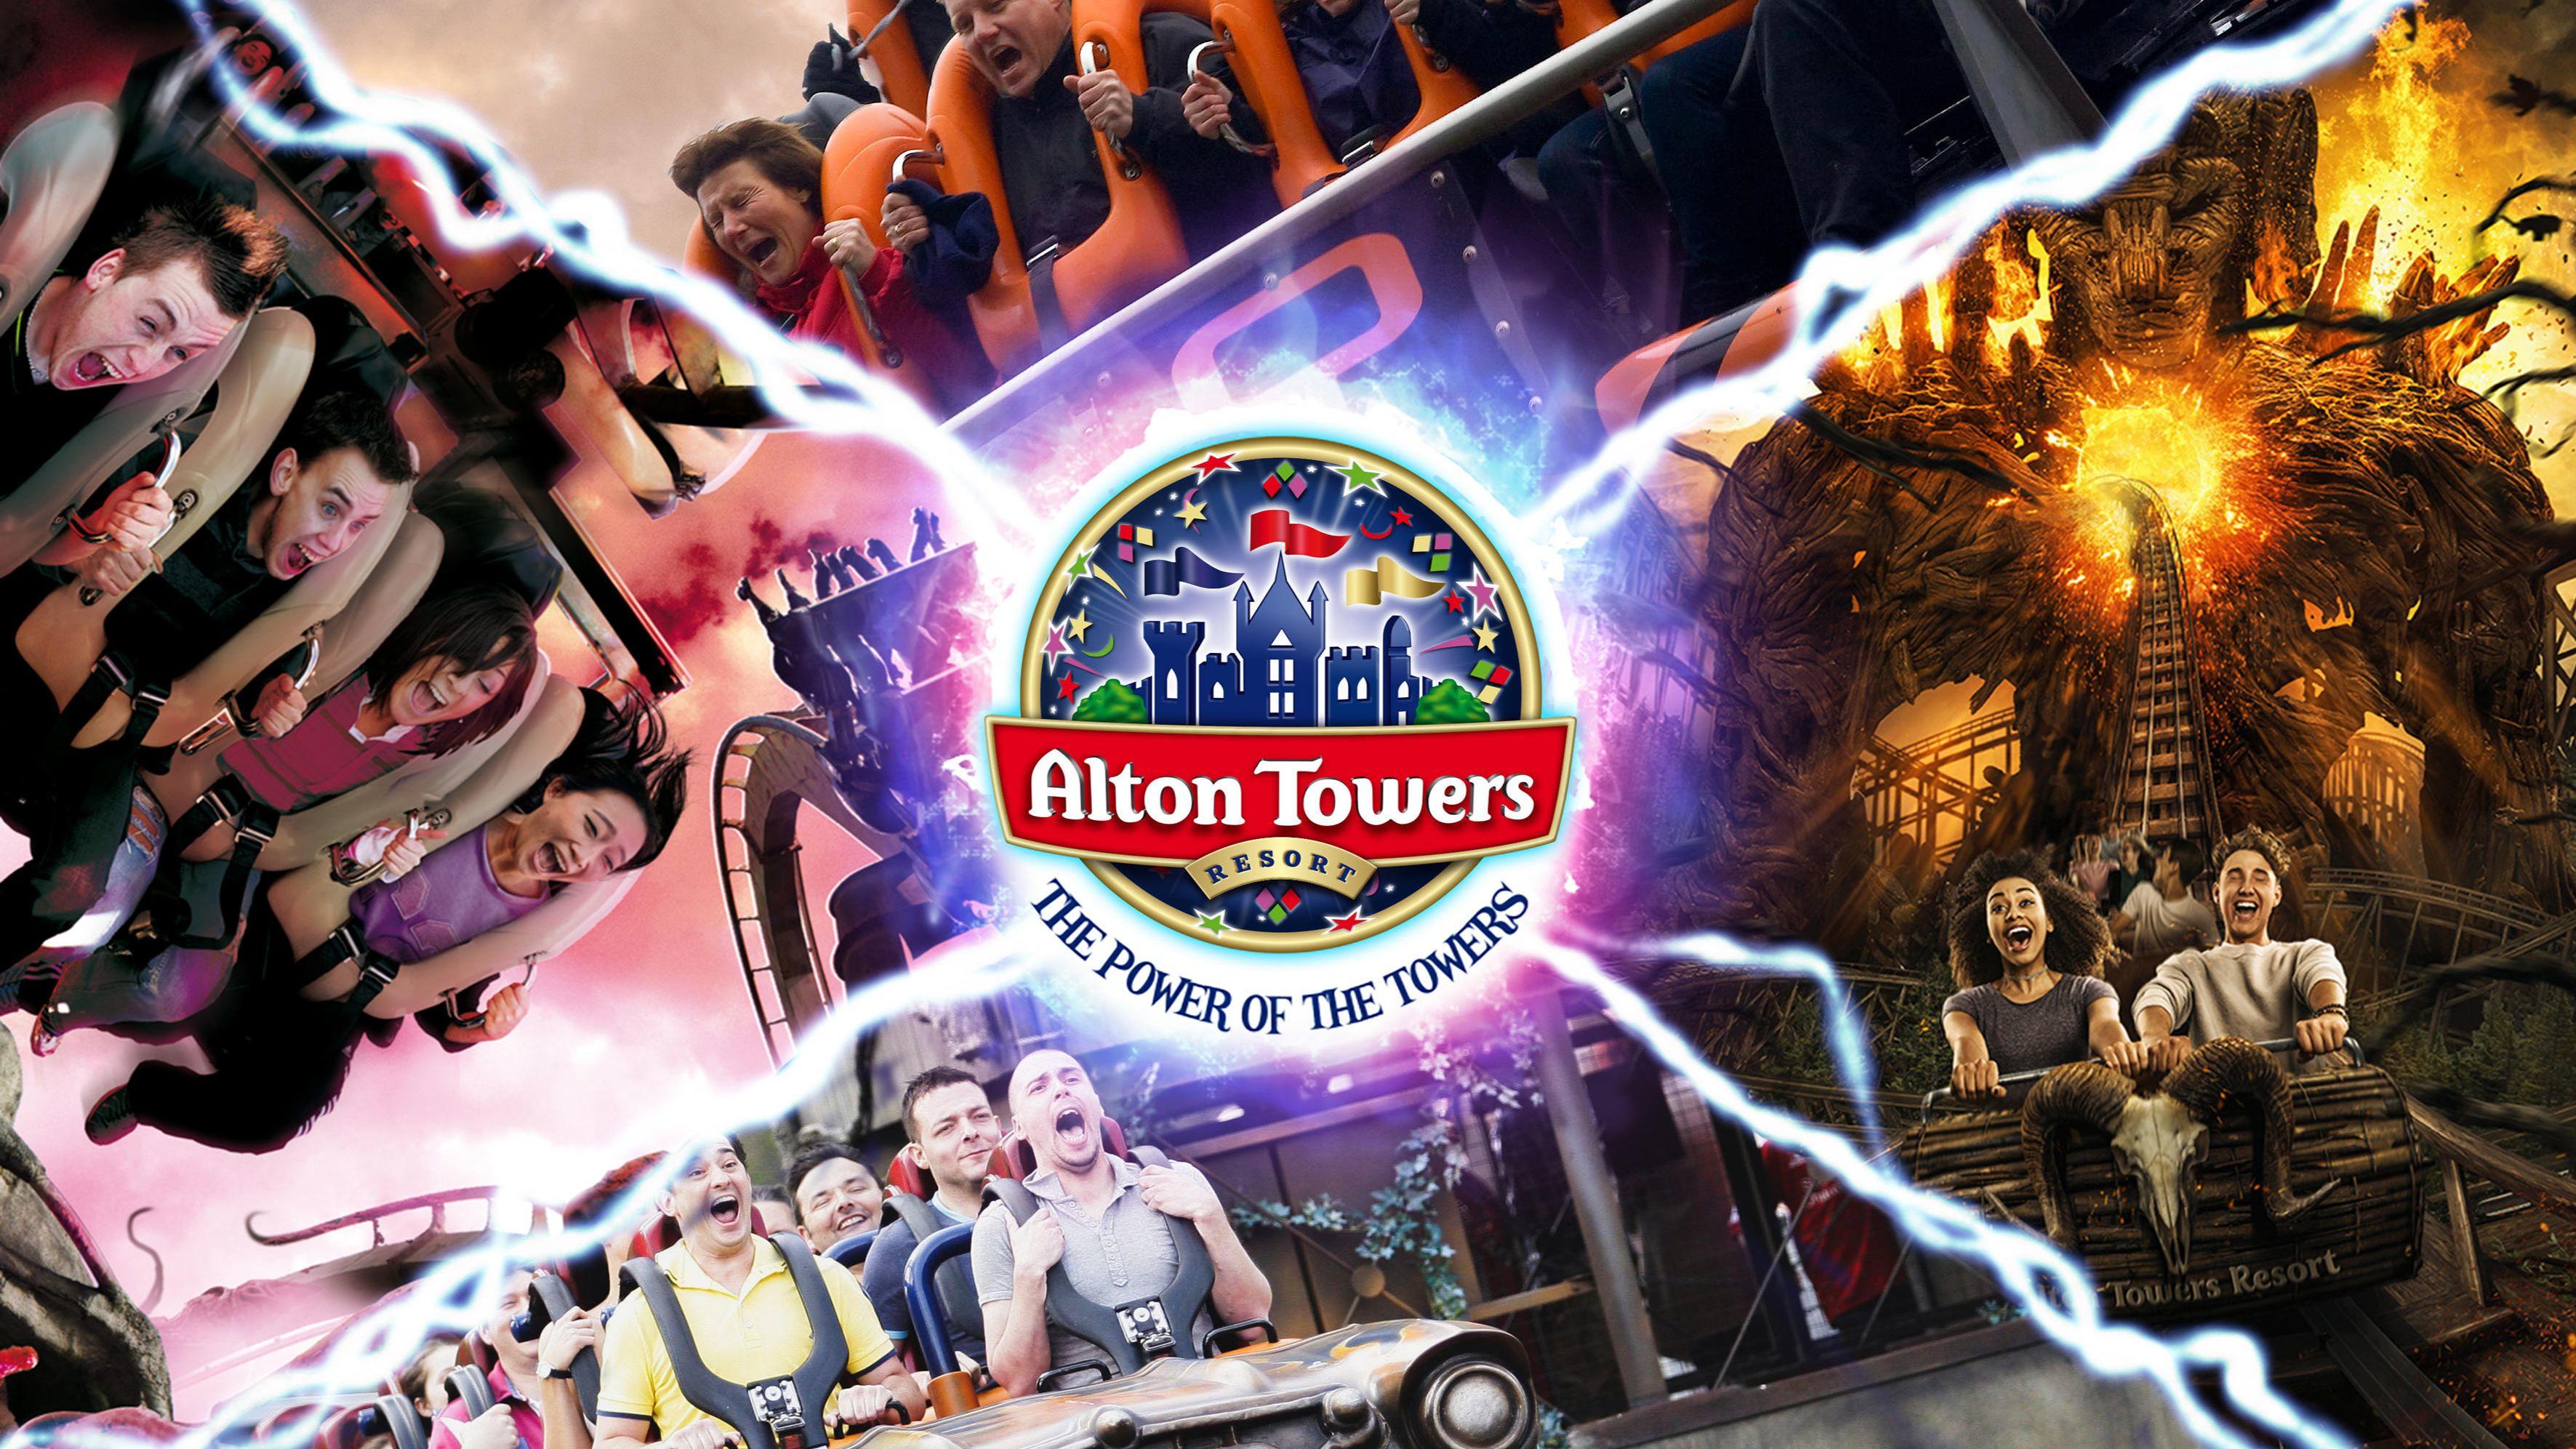 Alton Towers Resort - ❗FREE digital ride photo offer now on❗ Buy and collect your Season Pass before 2nd June to receive a Season Digipass